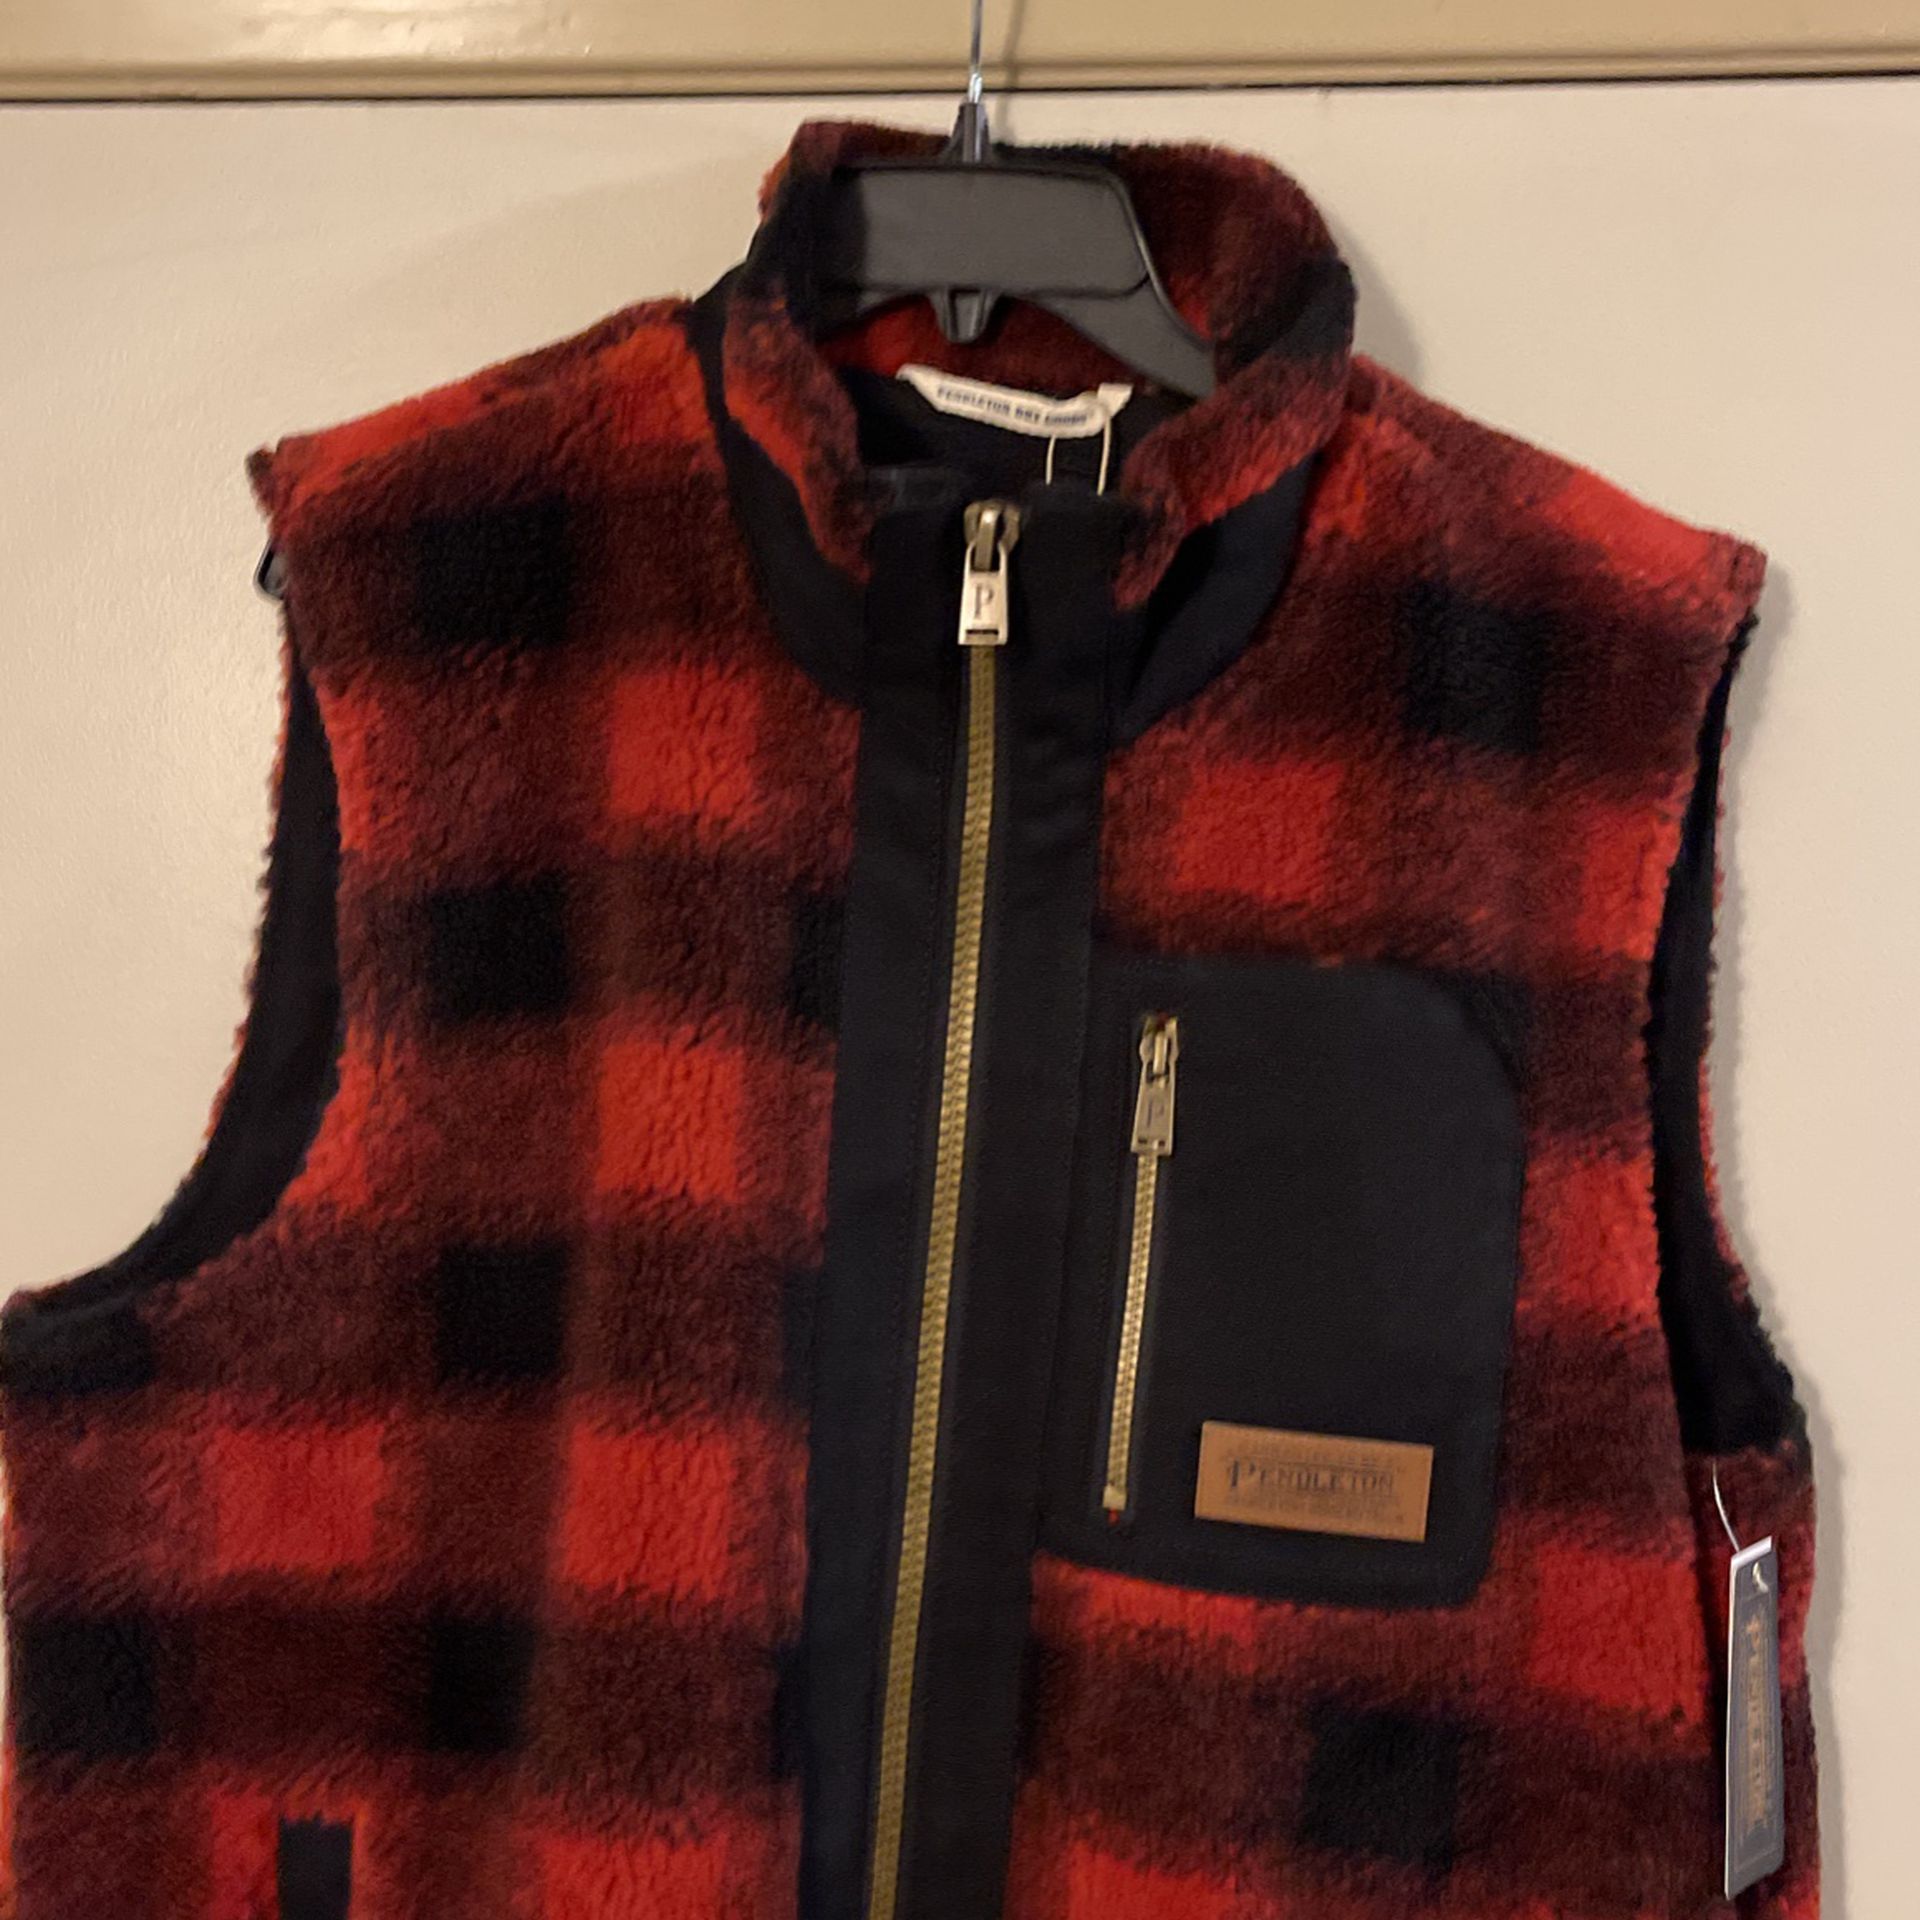 New With Tags Pendleton Red Buffalo Vest Large. No Deliveries 